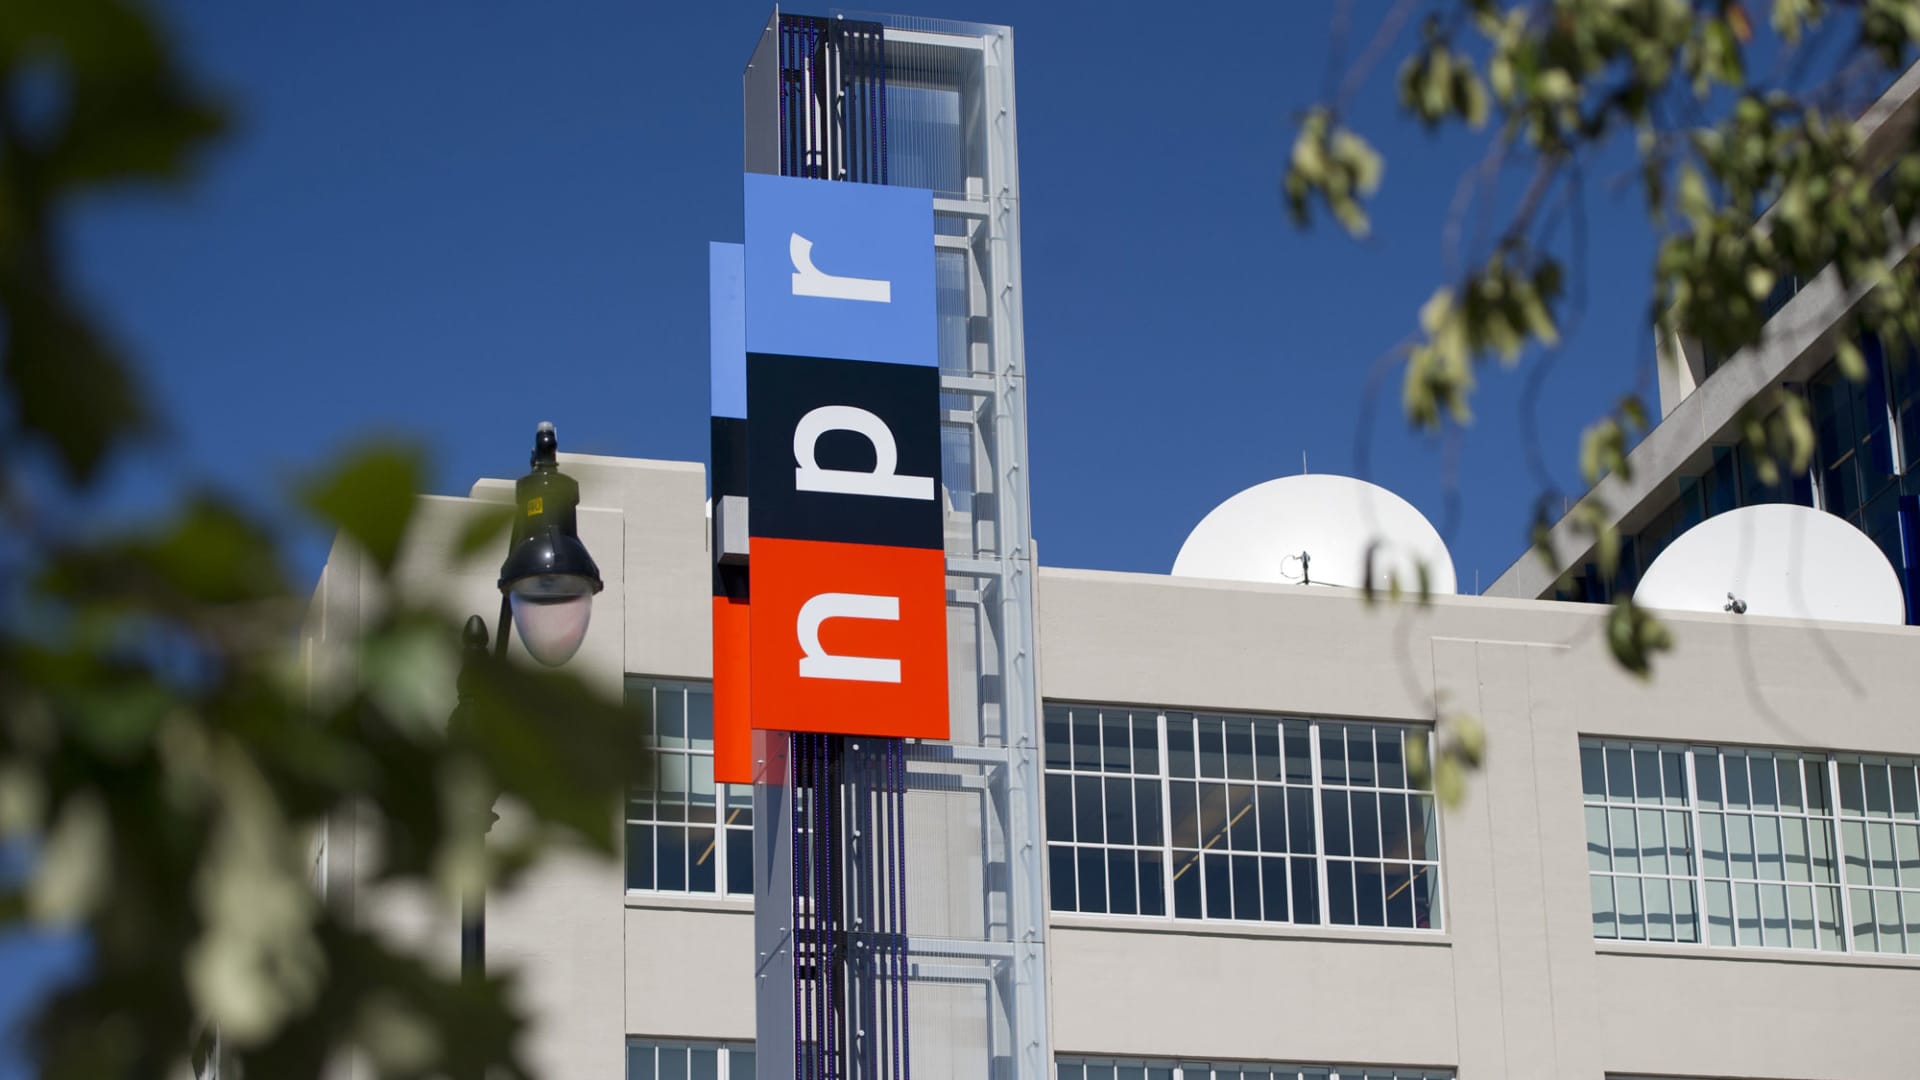 NPR quits Twitter, becoming first major U.S. news outlet to do so